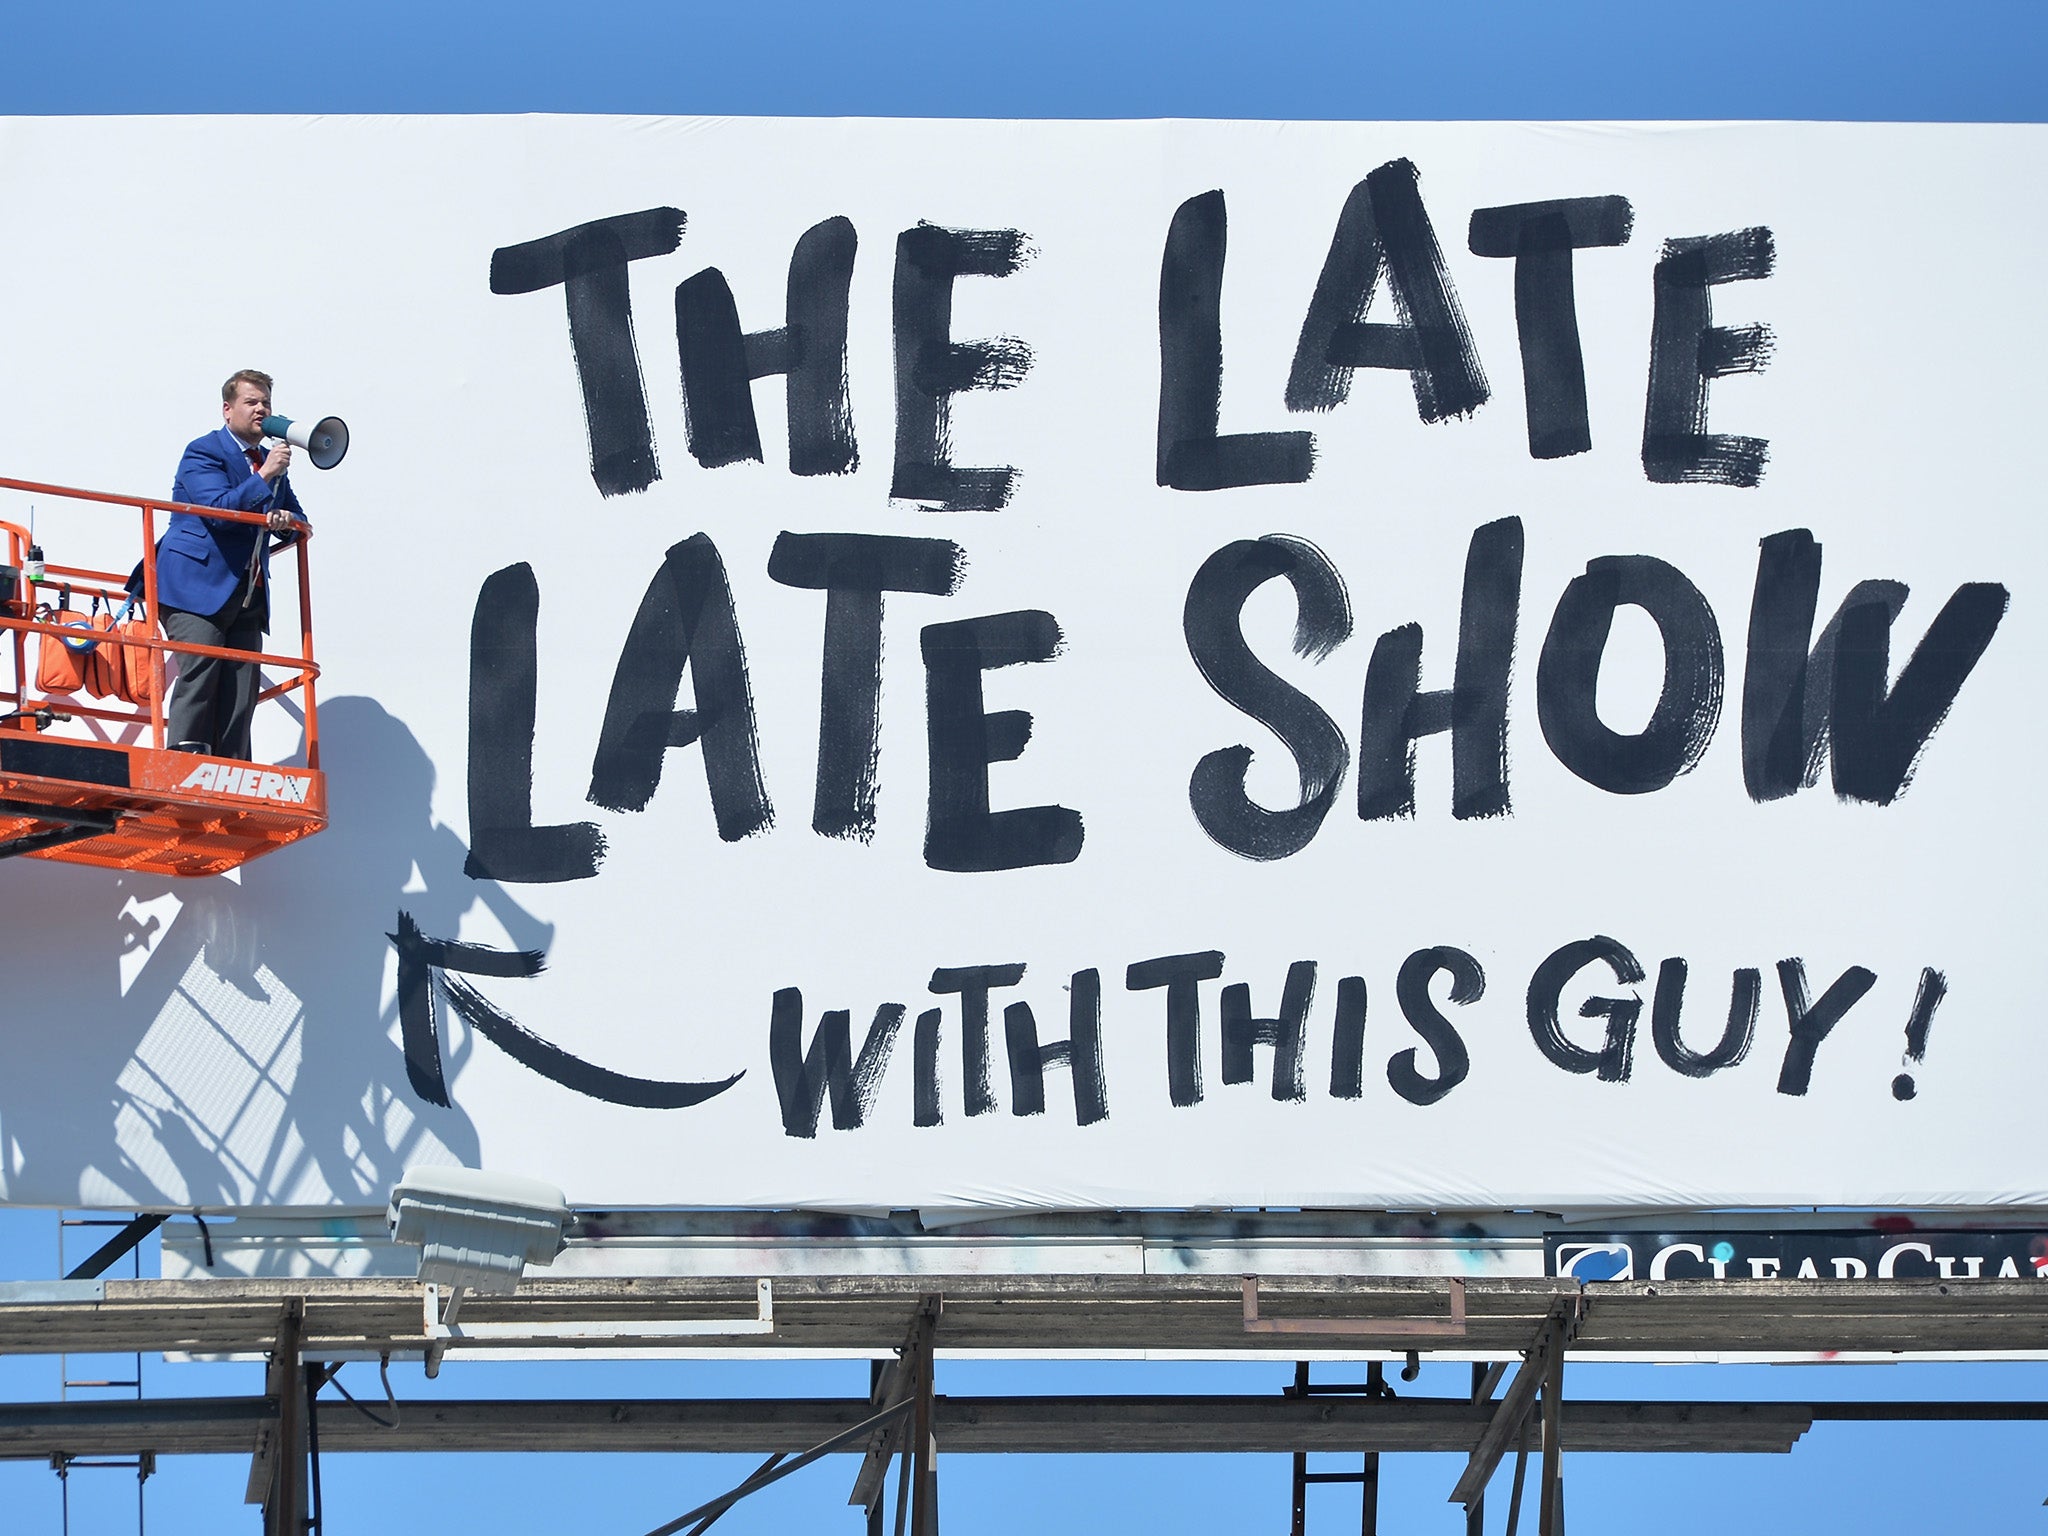 Actor/host James Corden puts up his own billboard for CBS Television Network's "The Late Late Show"